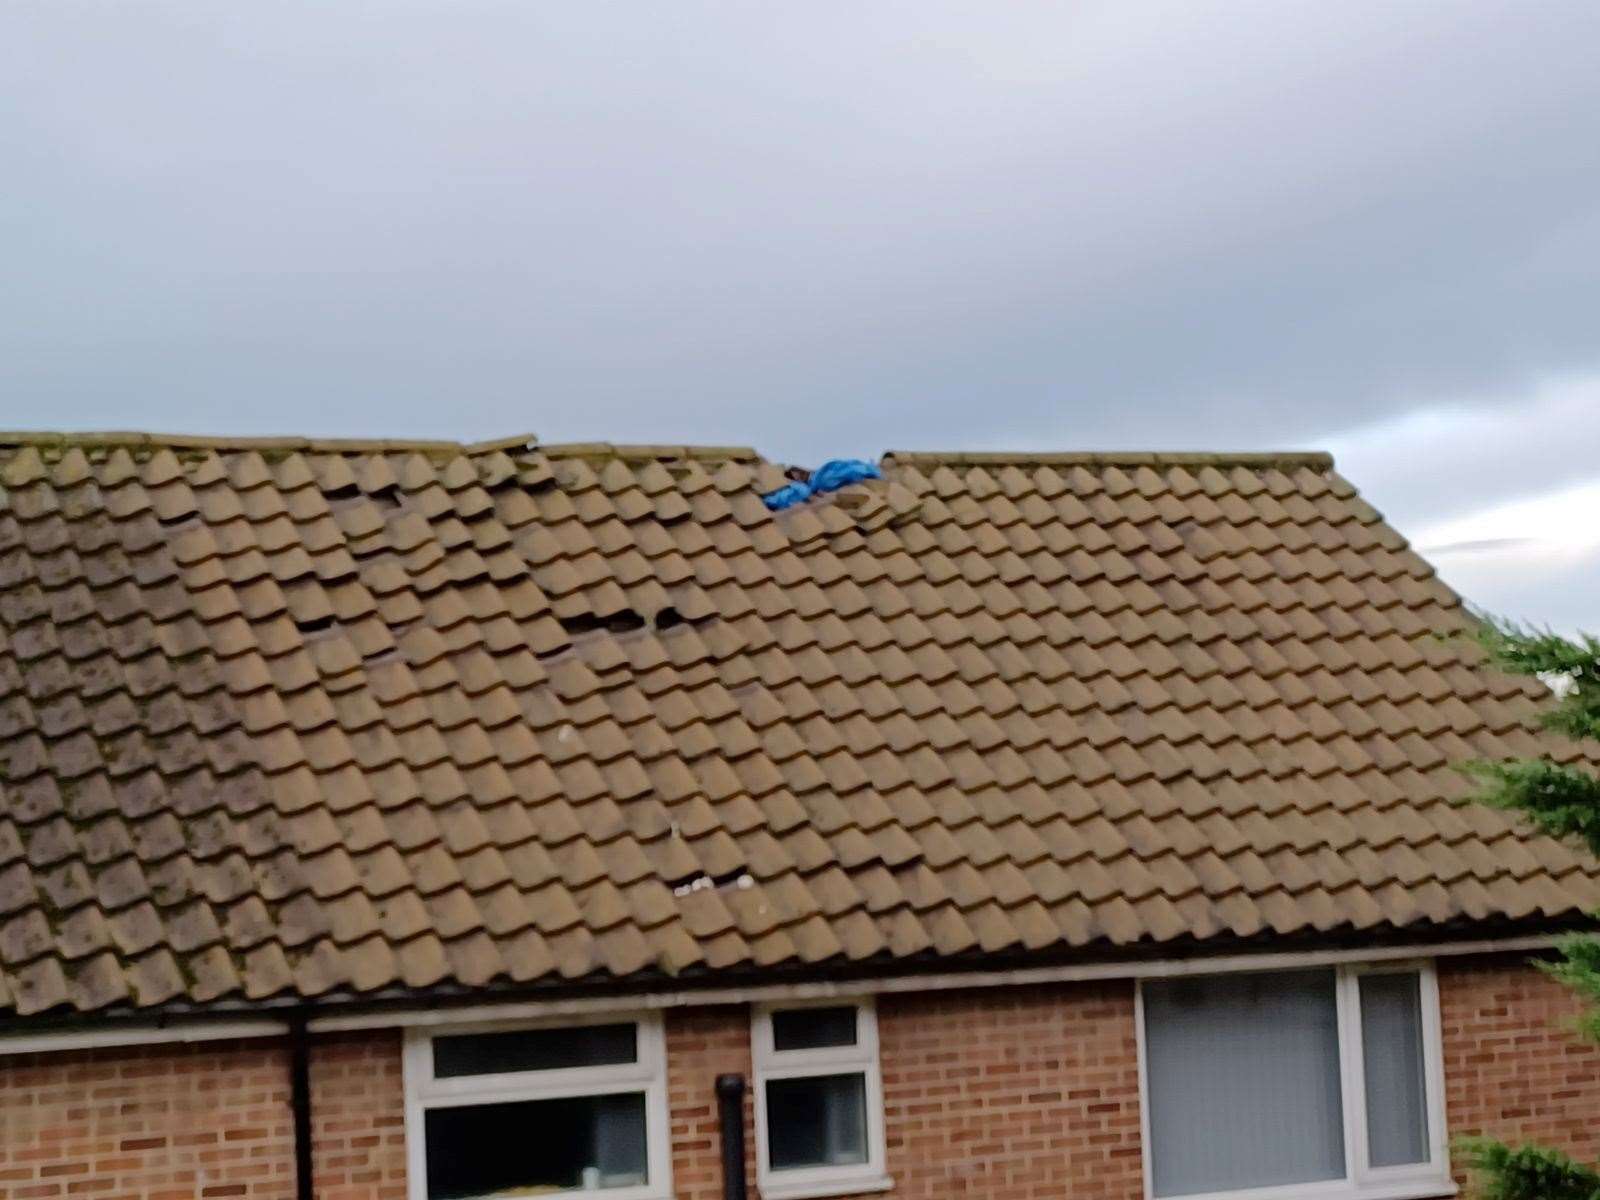 A lightning bolt has punched a hole in the roof of a house in Folkestone